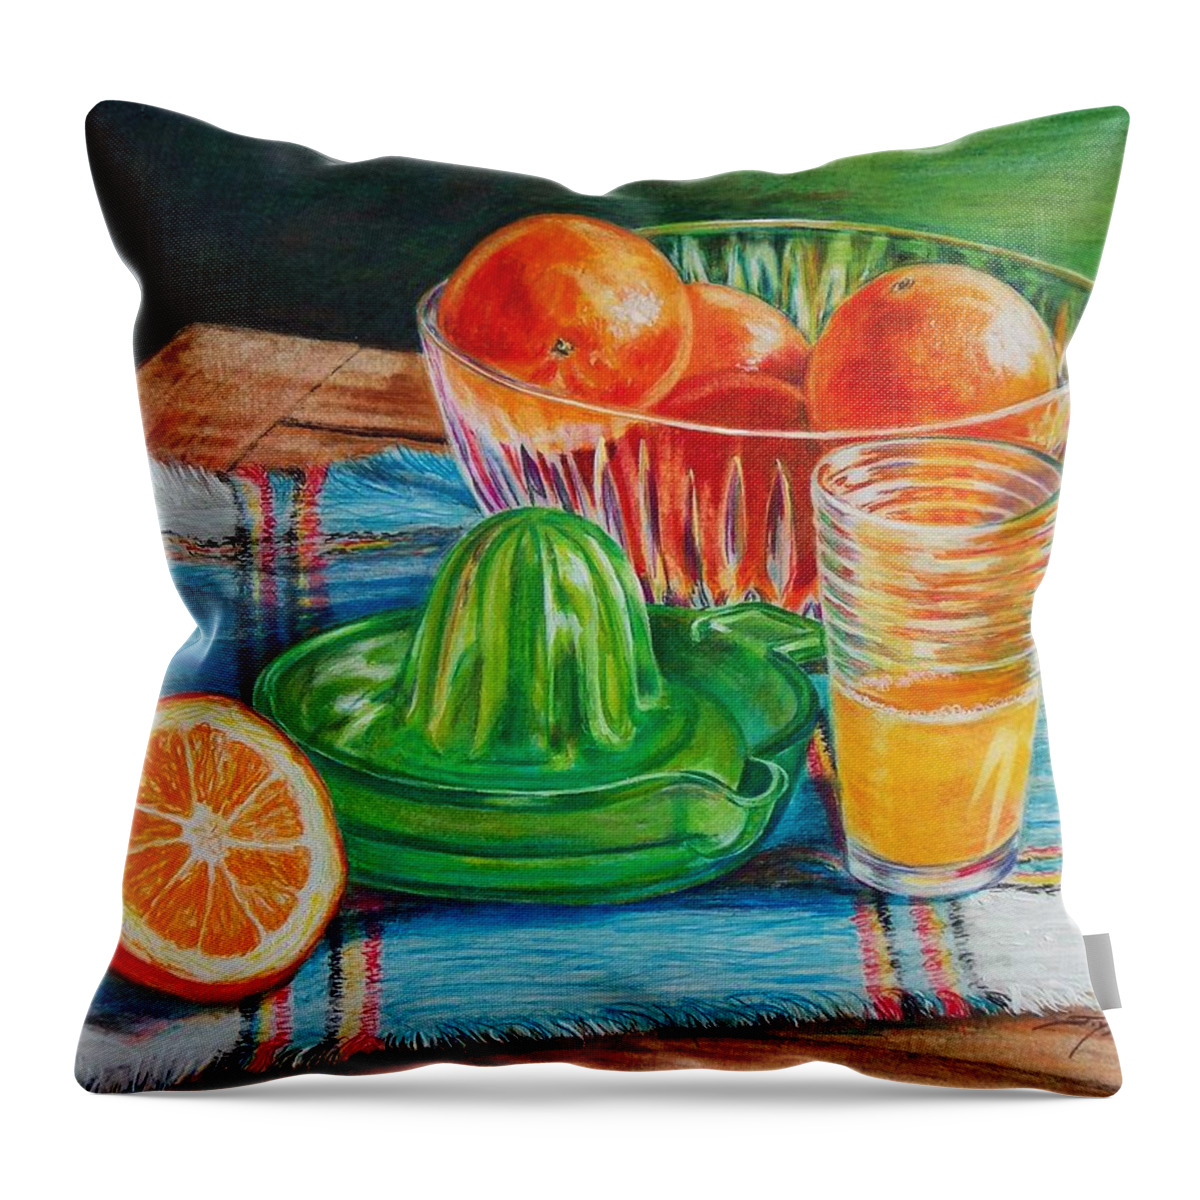 Produce Throw Pillow featuring the drawing Oranges by Joy Nichols